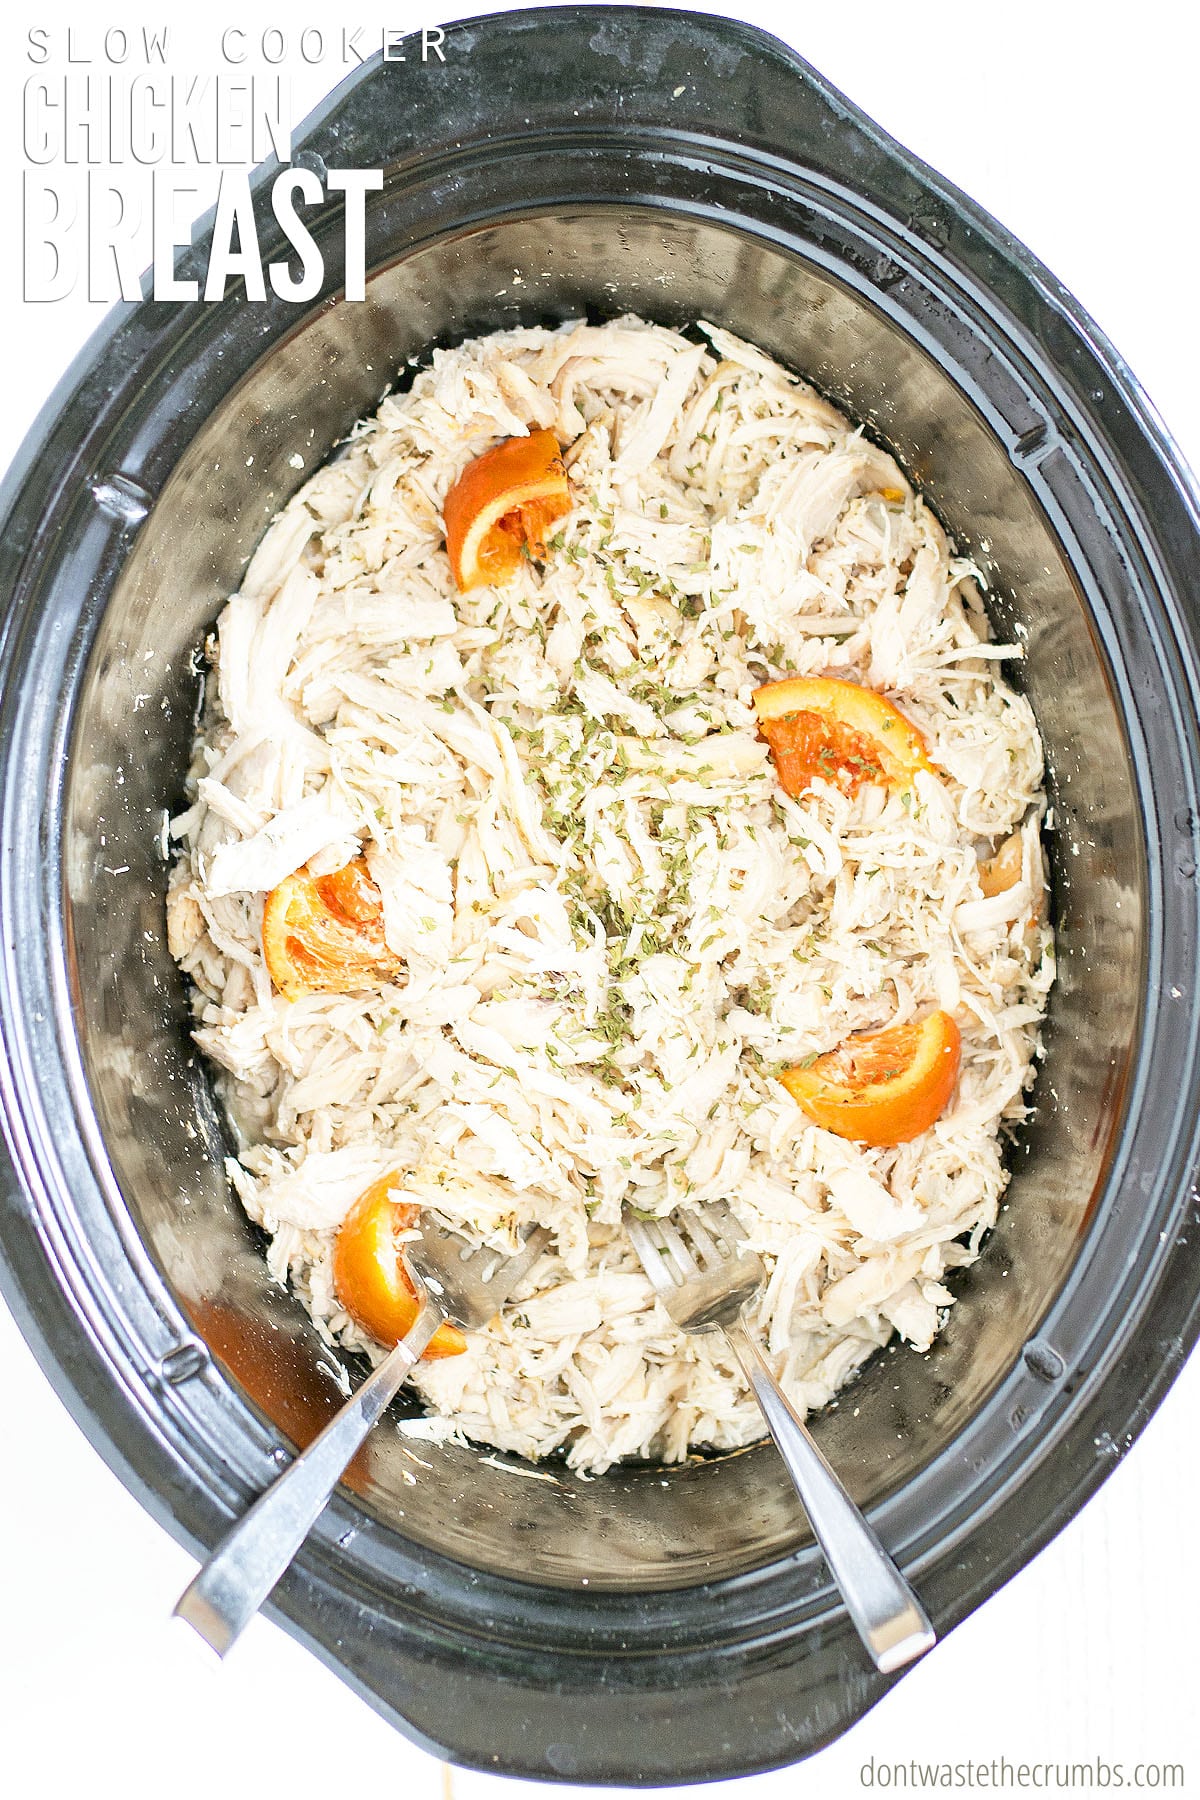 This easy Slow Cooker Chicken Breast recipe makes juicy, seasoned chicken that’s perfectly cooked - every time.